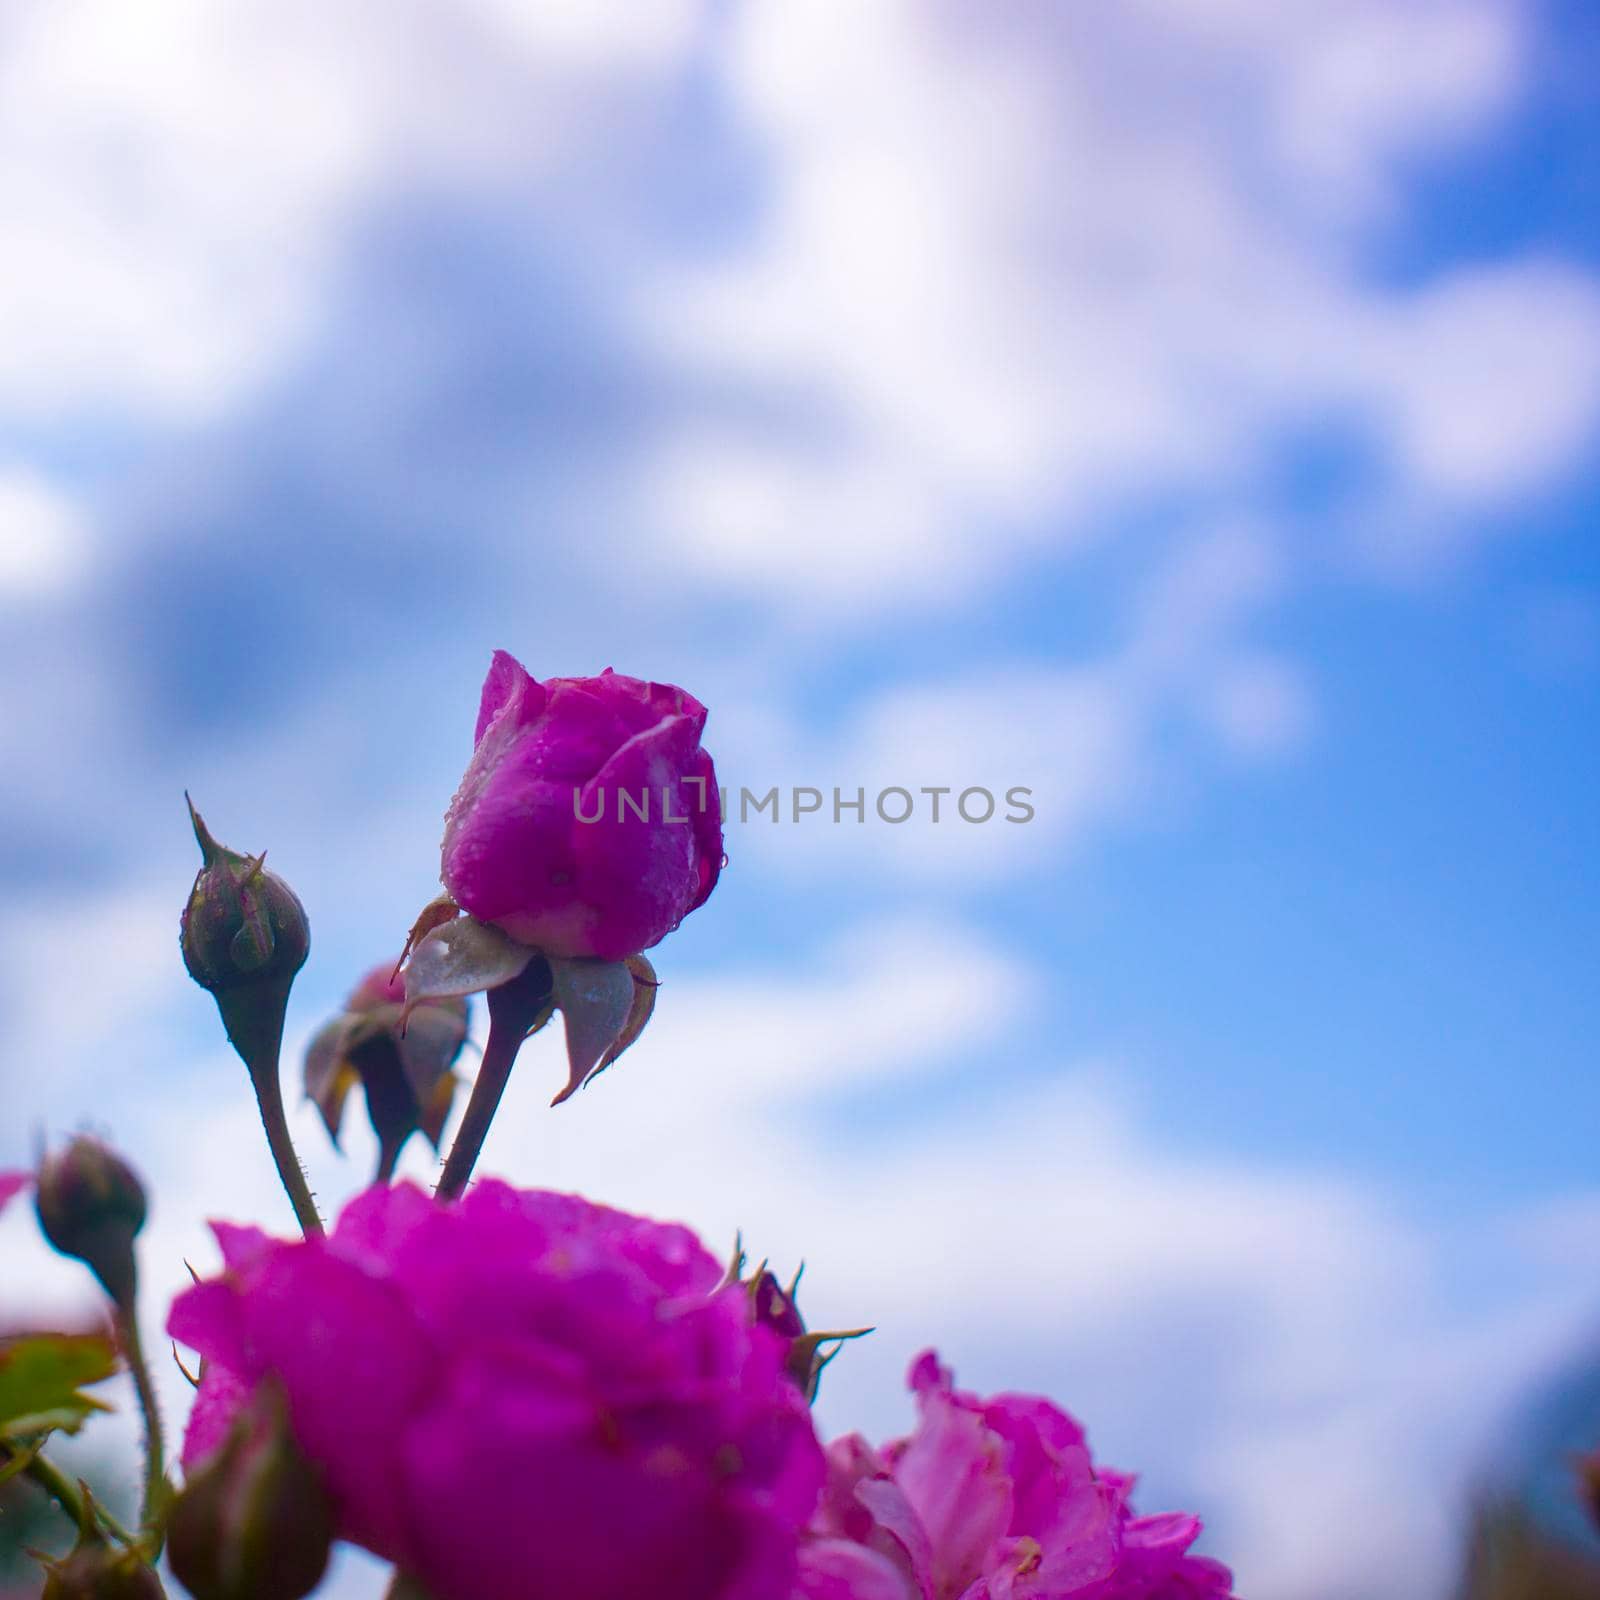 Beautiful pink roses flowers, glossy and green leaves on shrub branches against the blue cloudy sky and sun. Red rose flowers against the clear sky. by kajasja